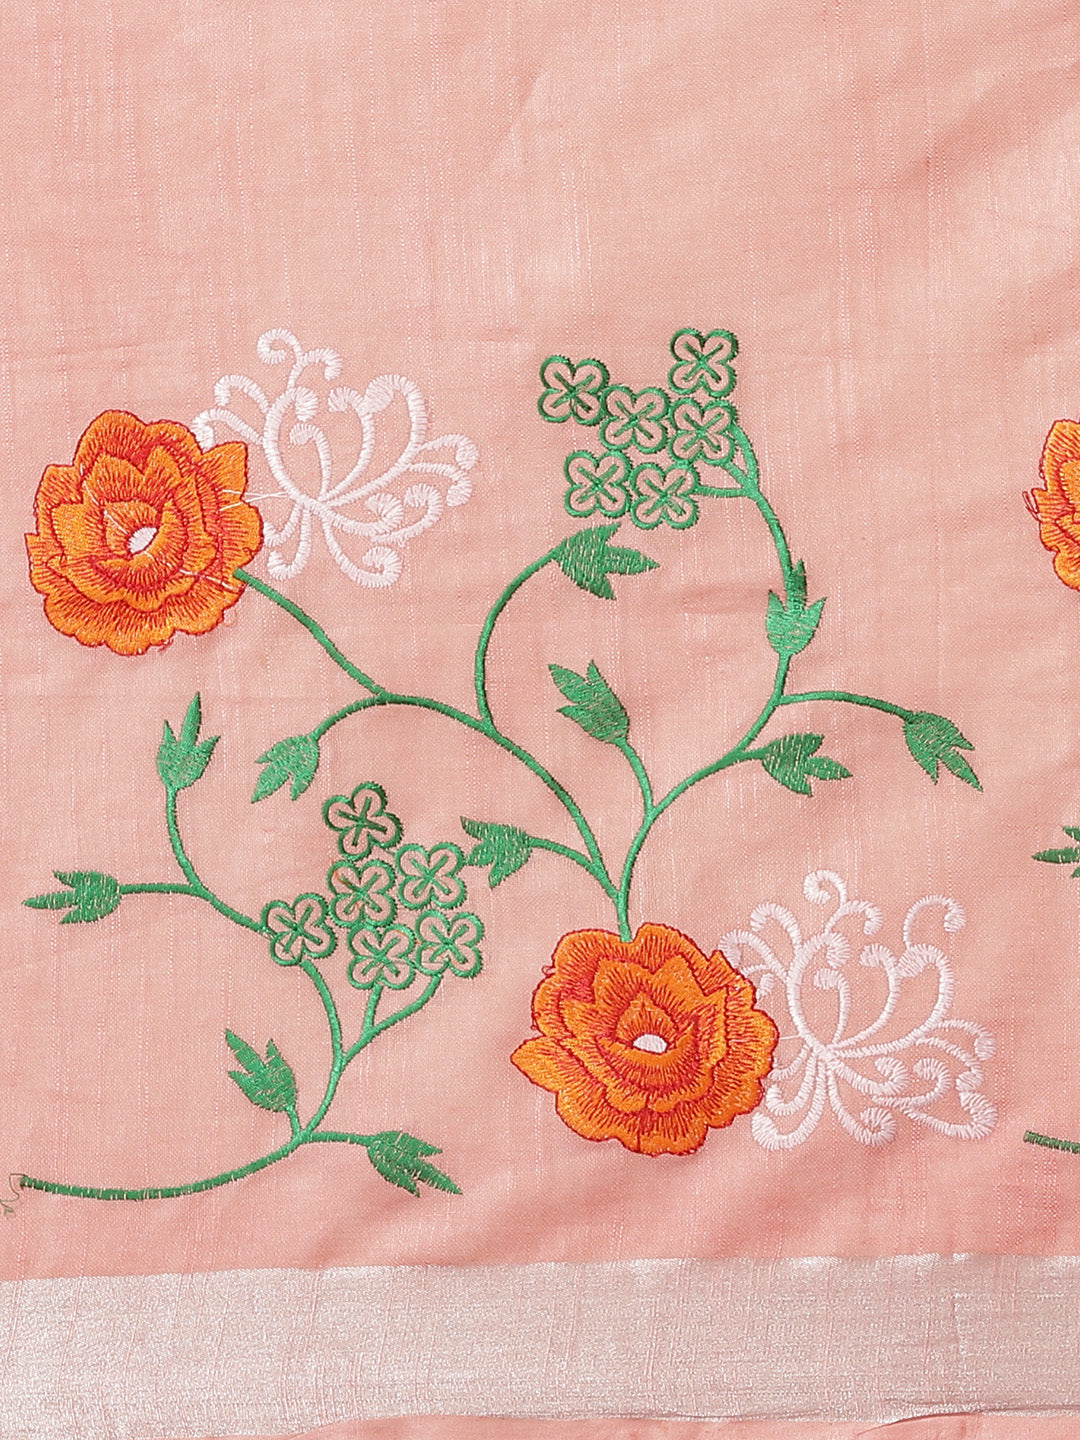 Peach and Orange, Kalakari India Linen Handwoven Saree and Blouse ALBGSA0087-Saree-Kalakari India-ALBGSA0087-Cotton, Geographical Indication, Hand Crafted, Heritage Prints, Linen, Natural Dyes, Red, Sarees, Shibori, Sustainable Fabrics, Woven, Yellow-[Linen,Ethnic,wear,Fashionista,Handloom,Handicraft,Indigo,blockprint,block,print,Cotton,Chanderi,Blue, latest,classy,party,bollywood,trendy,summer,style,traditional,formal,elegant,unique,style,hand,block,print, dabu,booti,gift,present,glamorous,affo